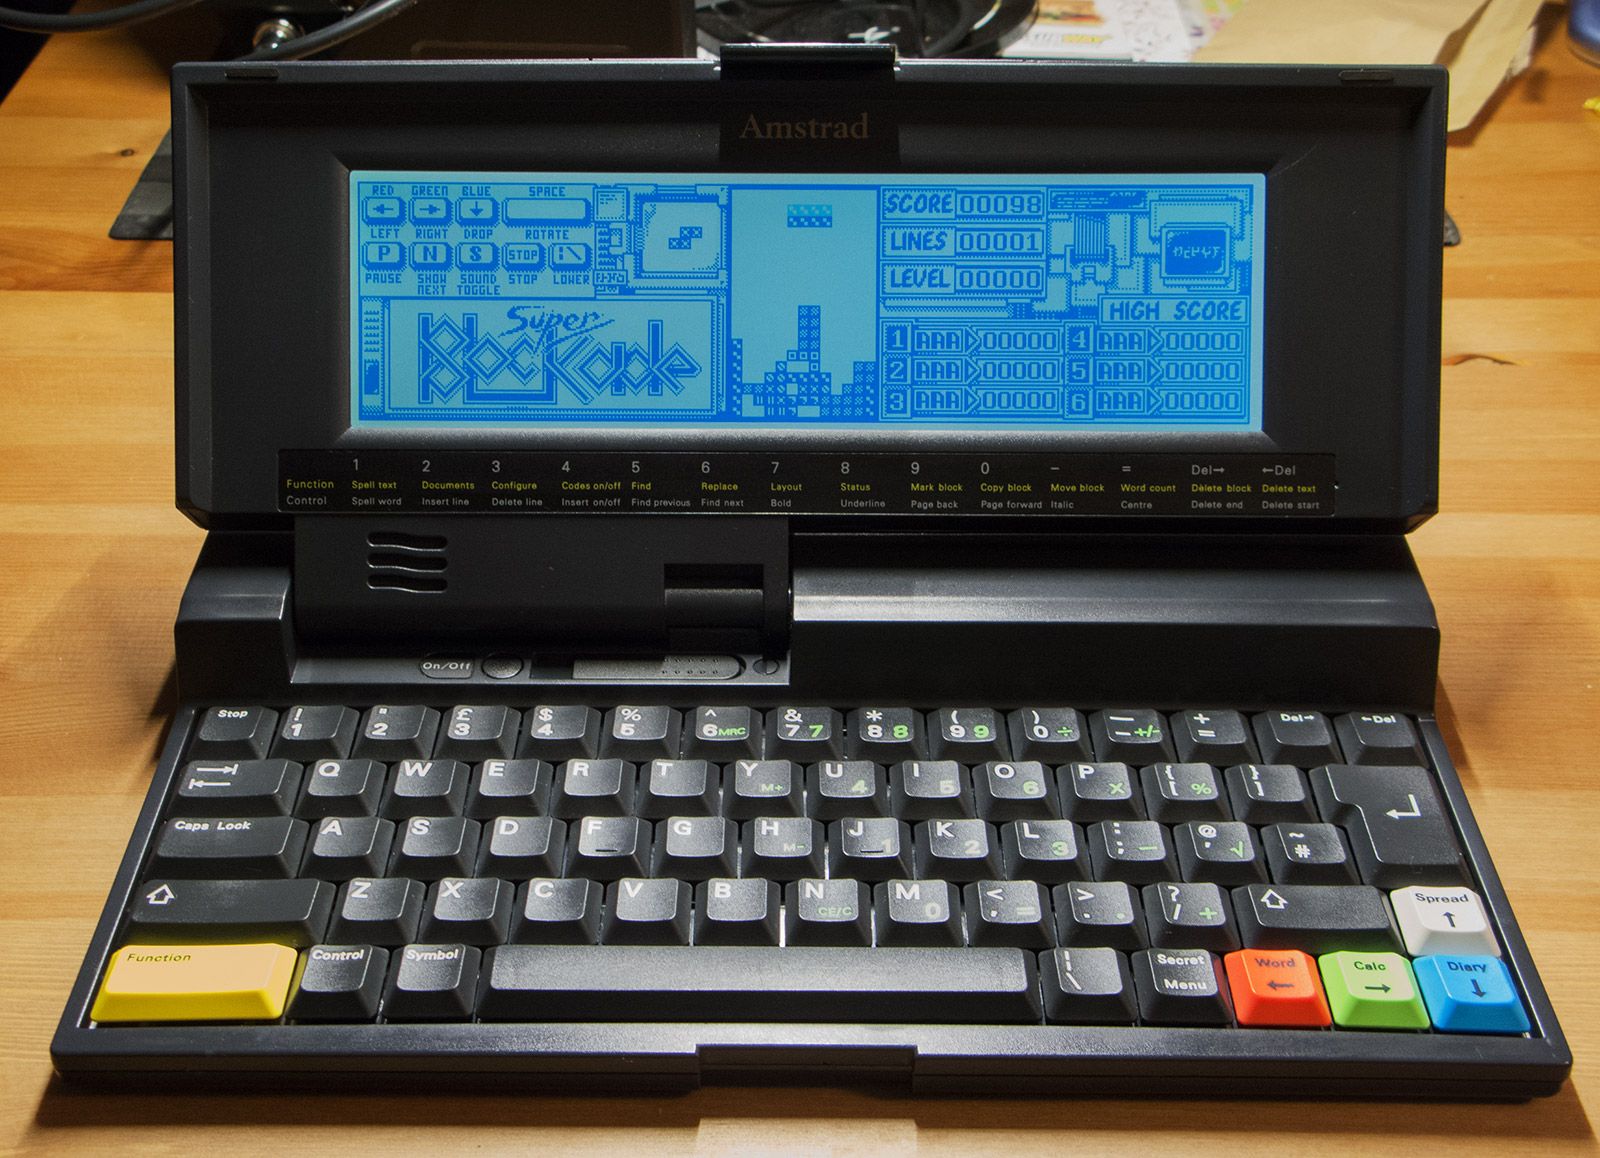 tetris being played on Amstrad Notepad NC200